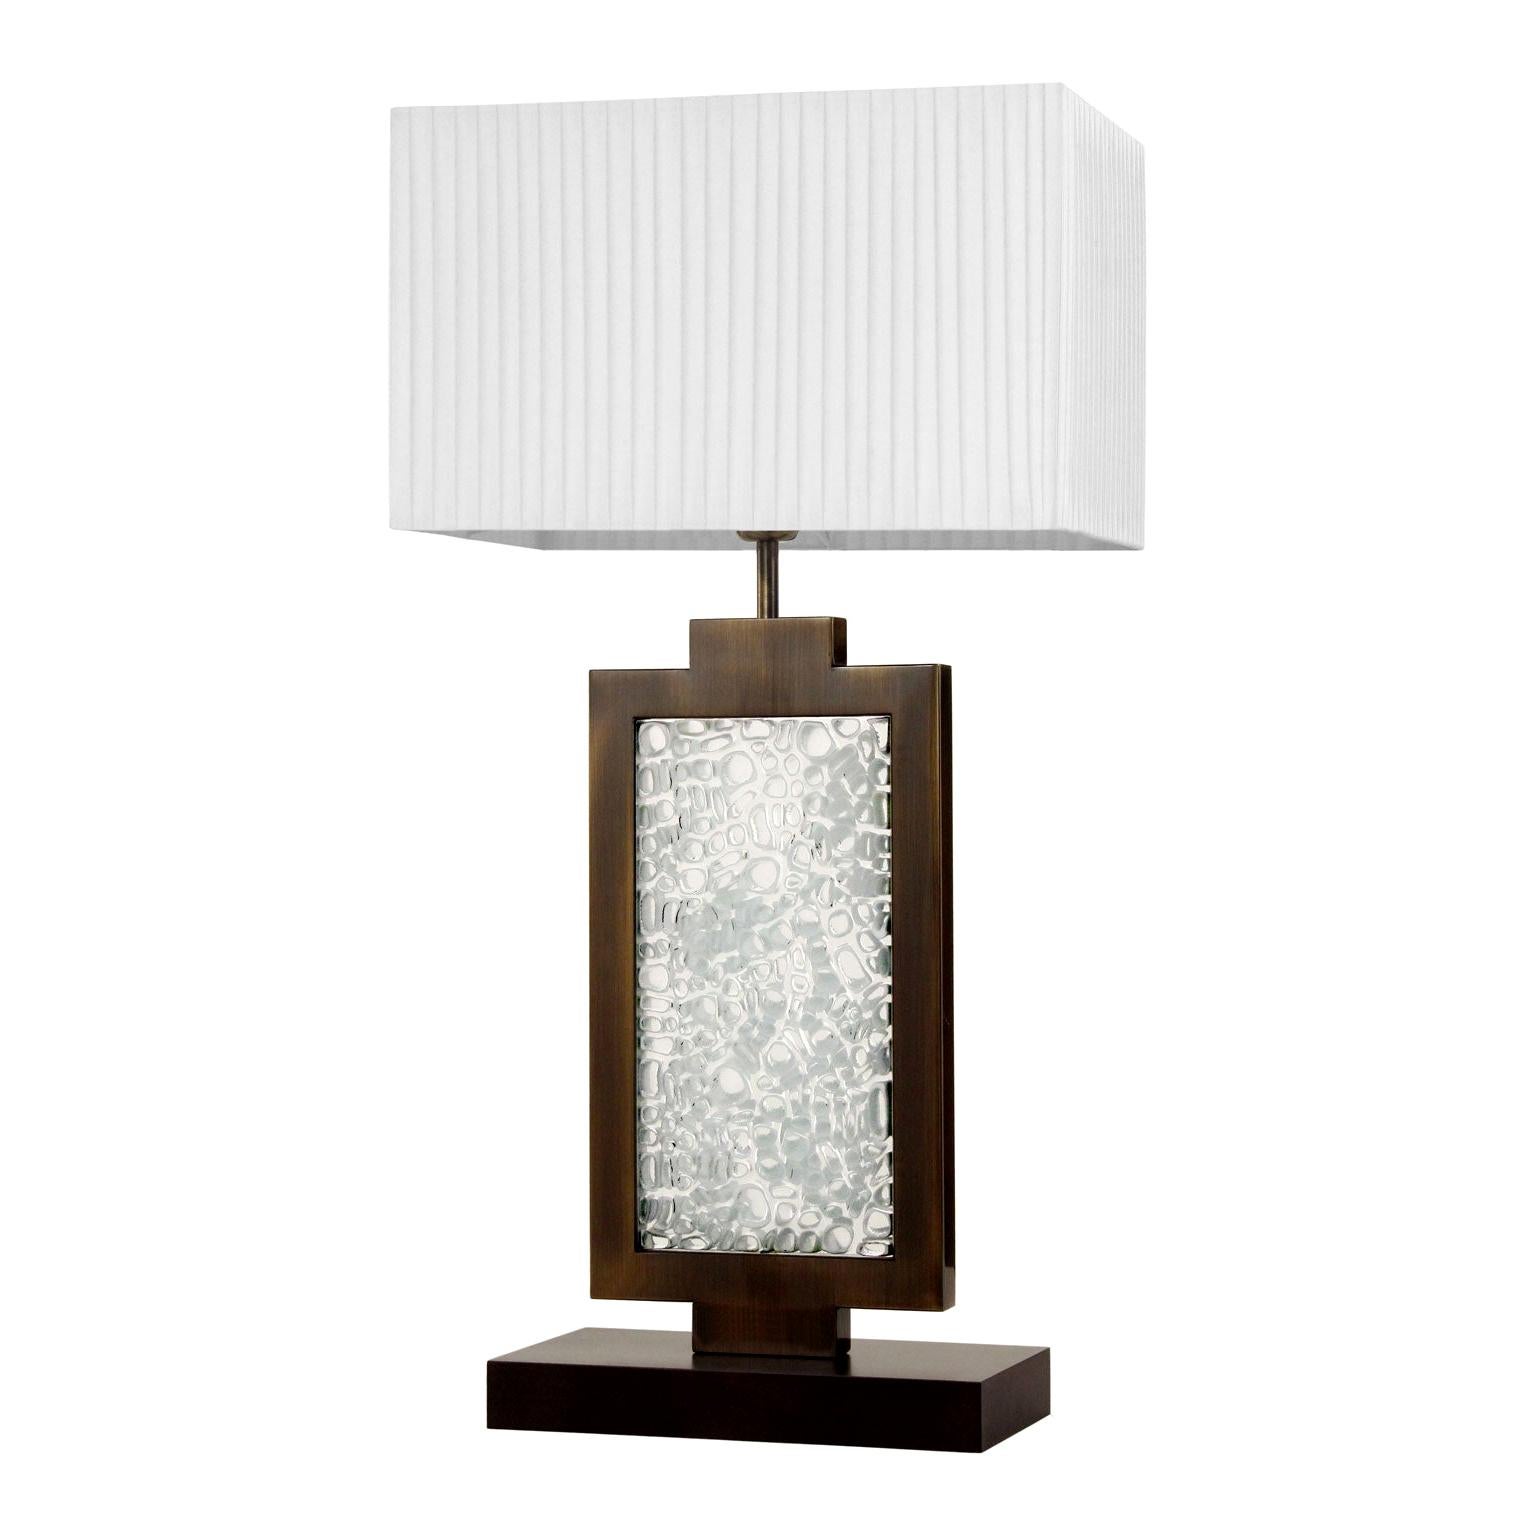 Table Lamp Artistic Murano Glass Block, white Lampshade by Multiforme in stock